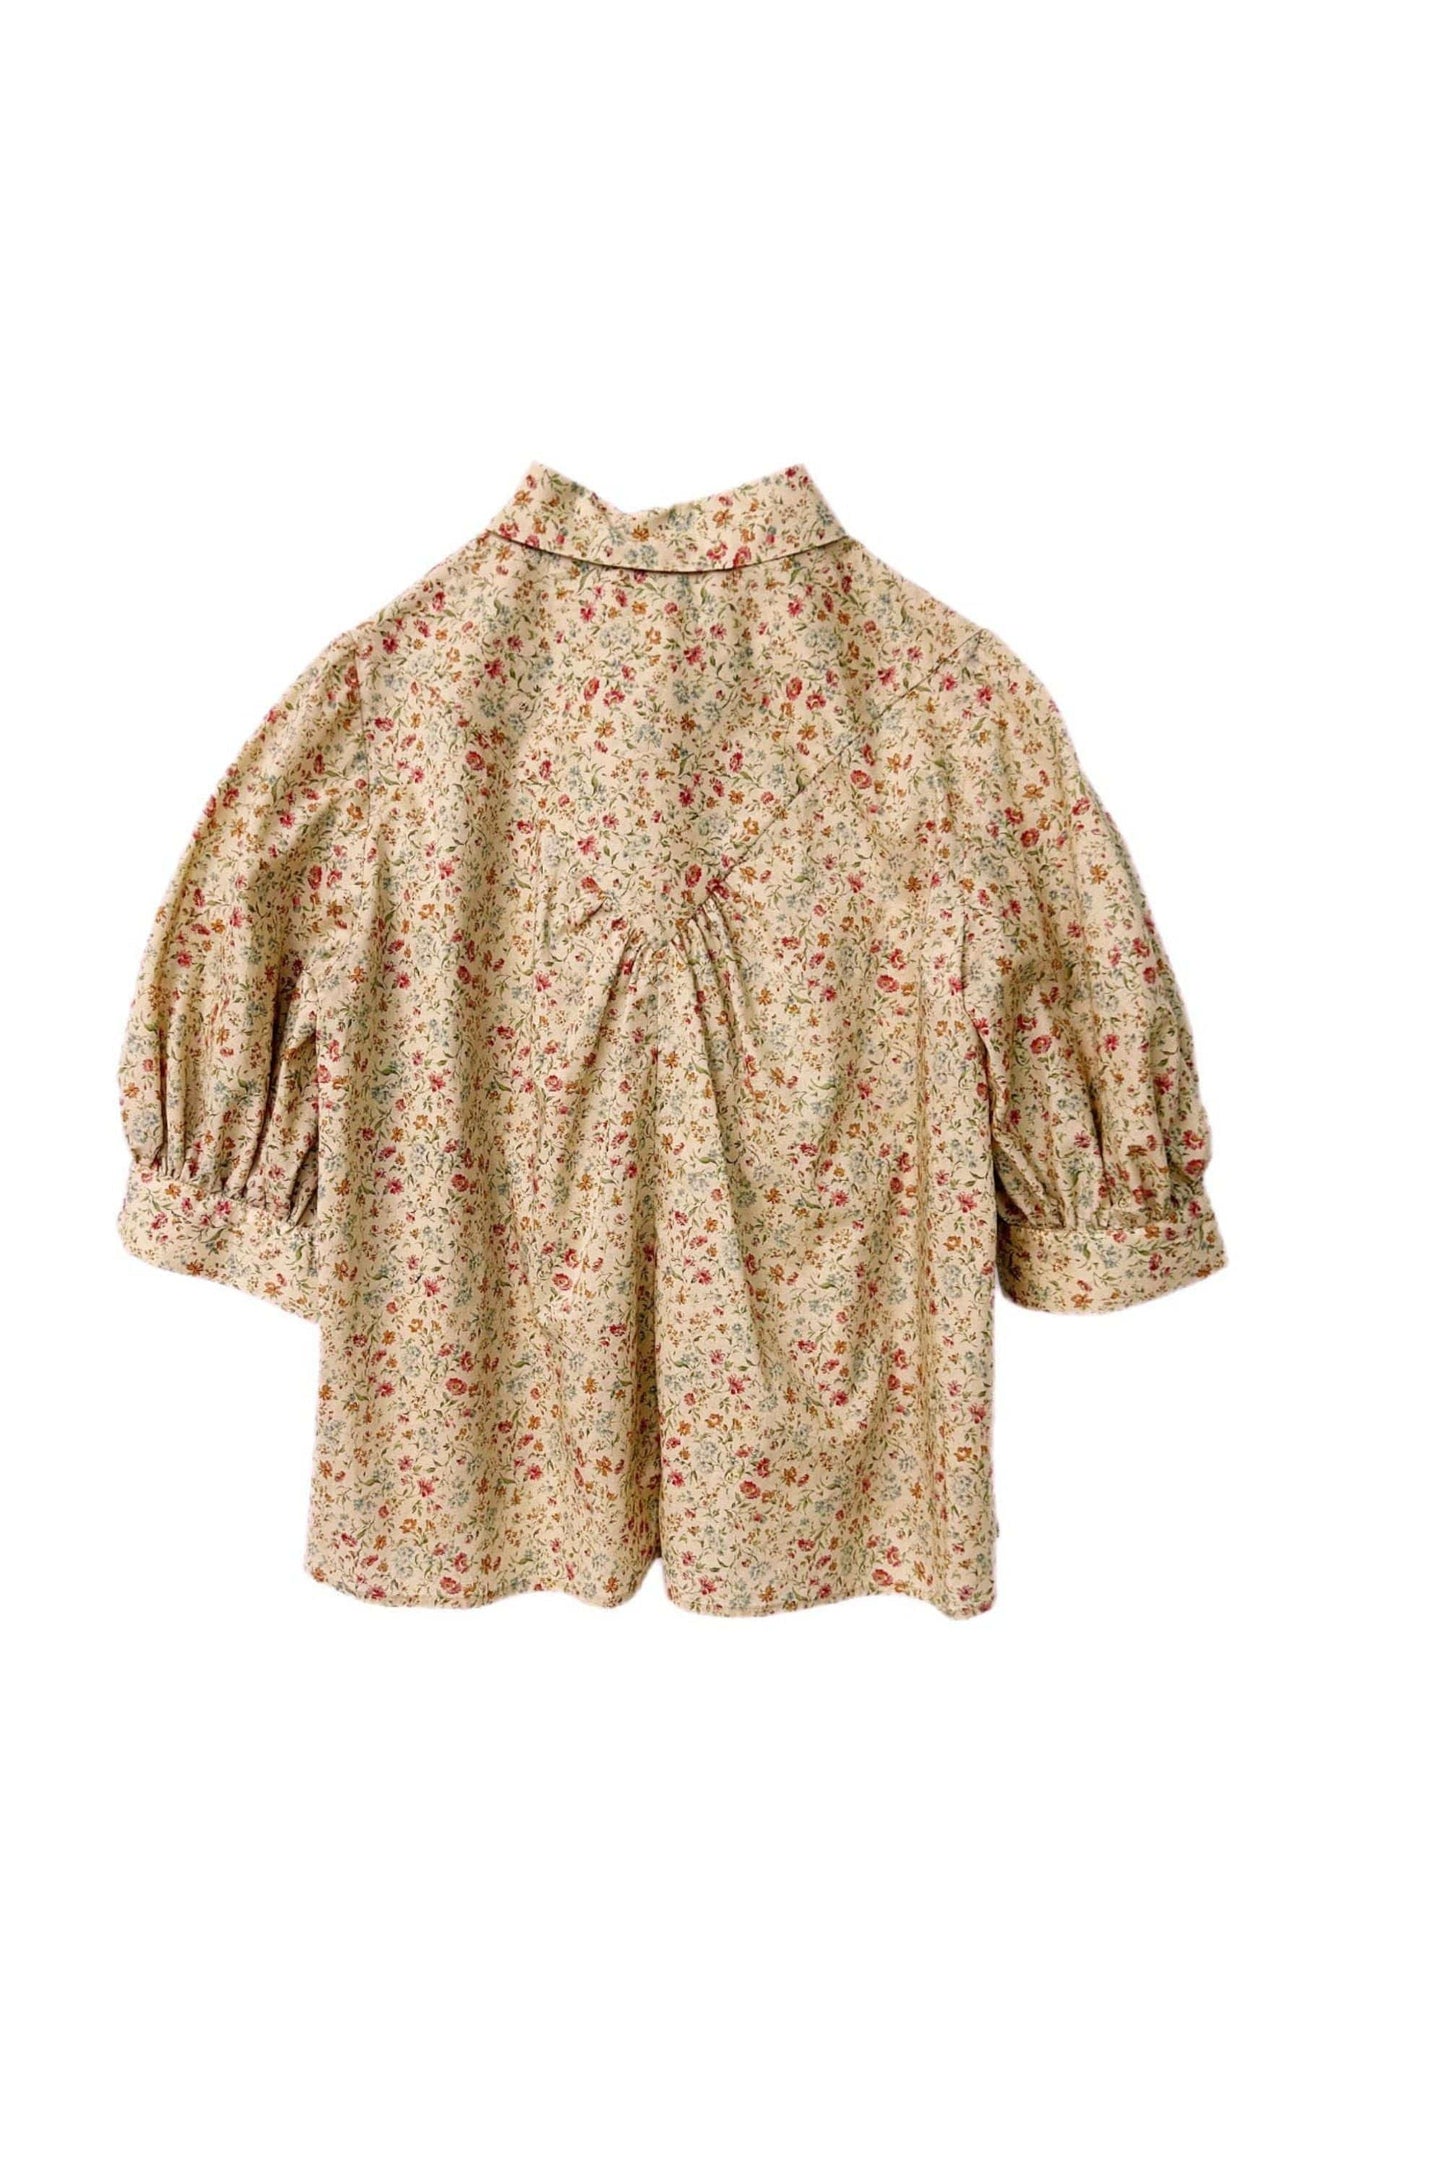 Sylvia Blouse in Cotton Floral Blouses CHRISTINE ALCALAY   